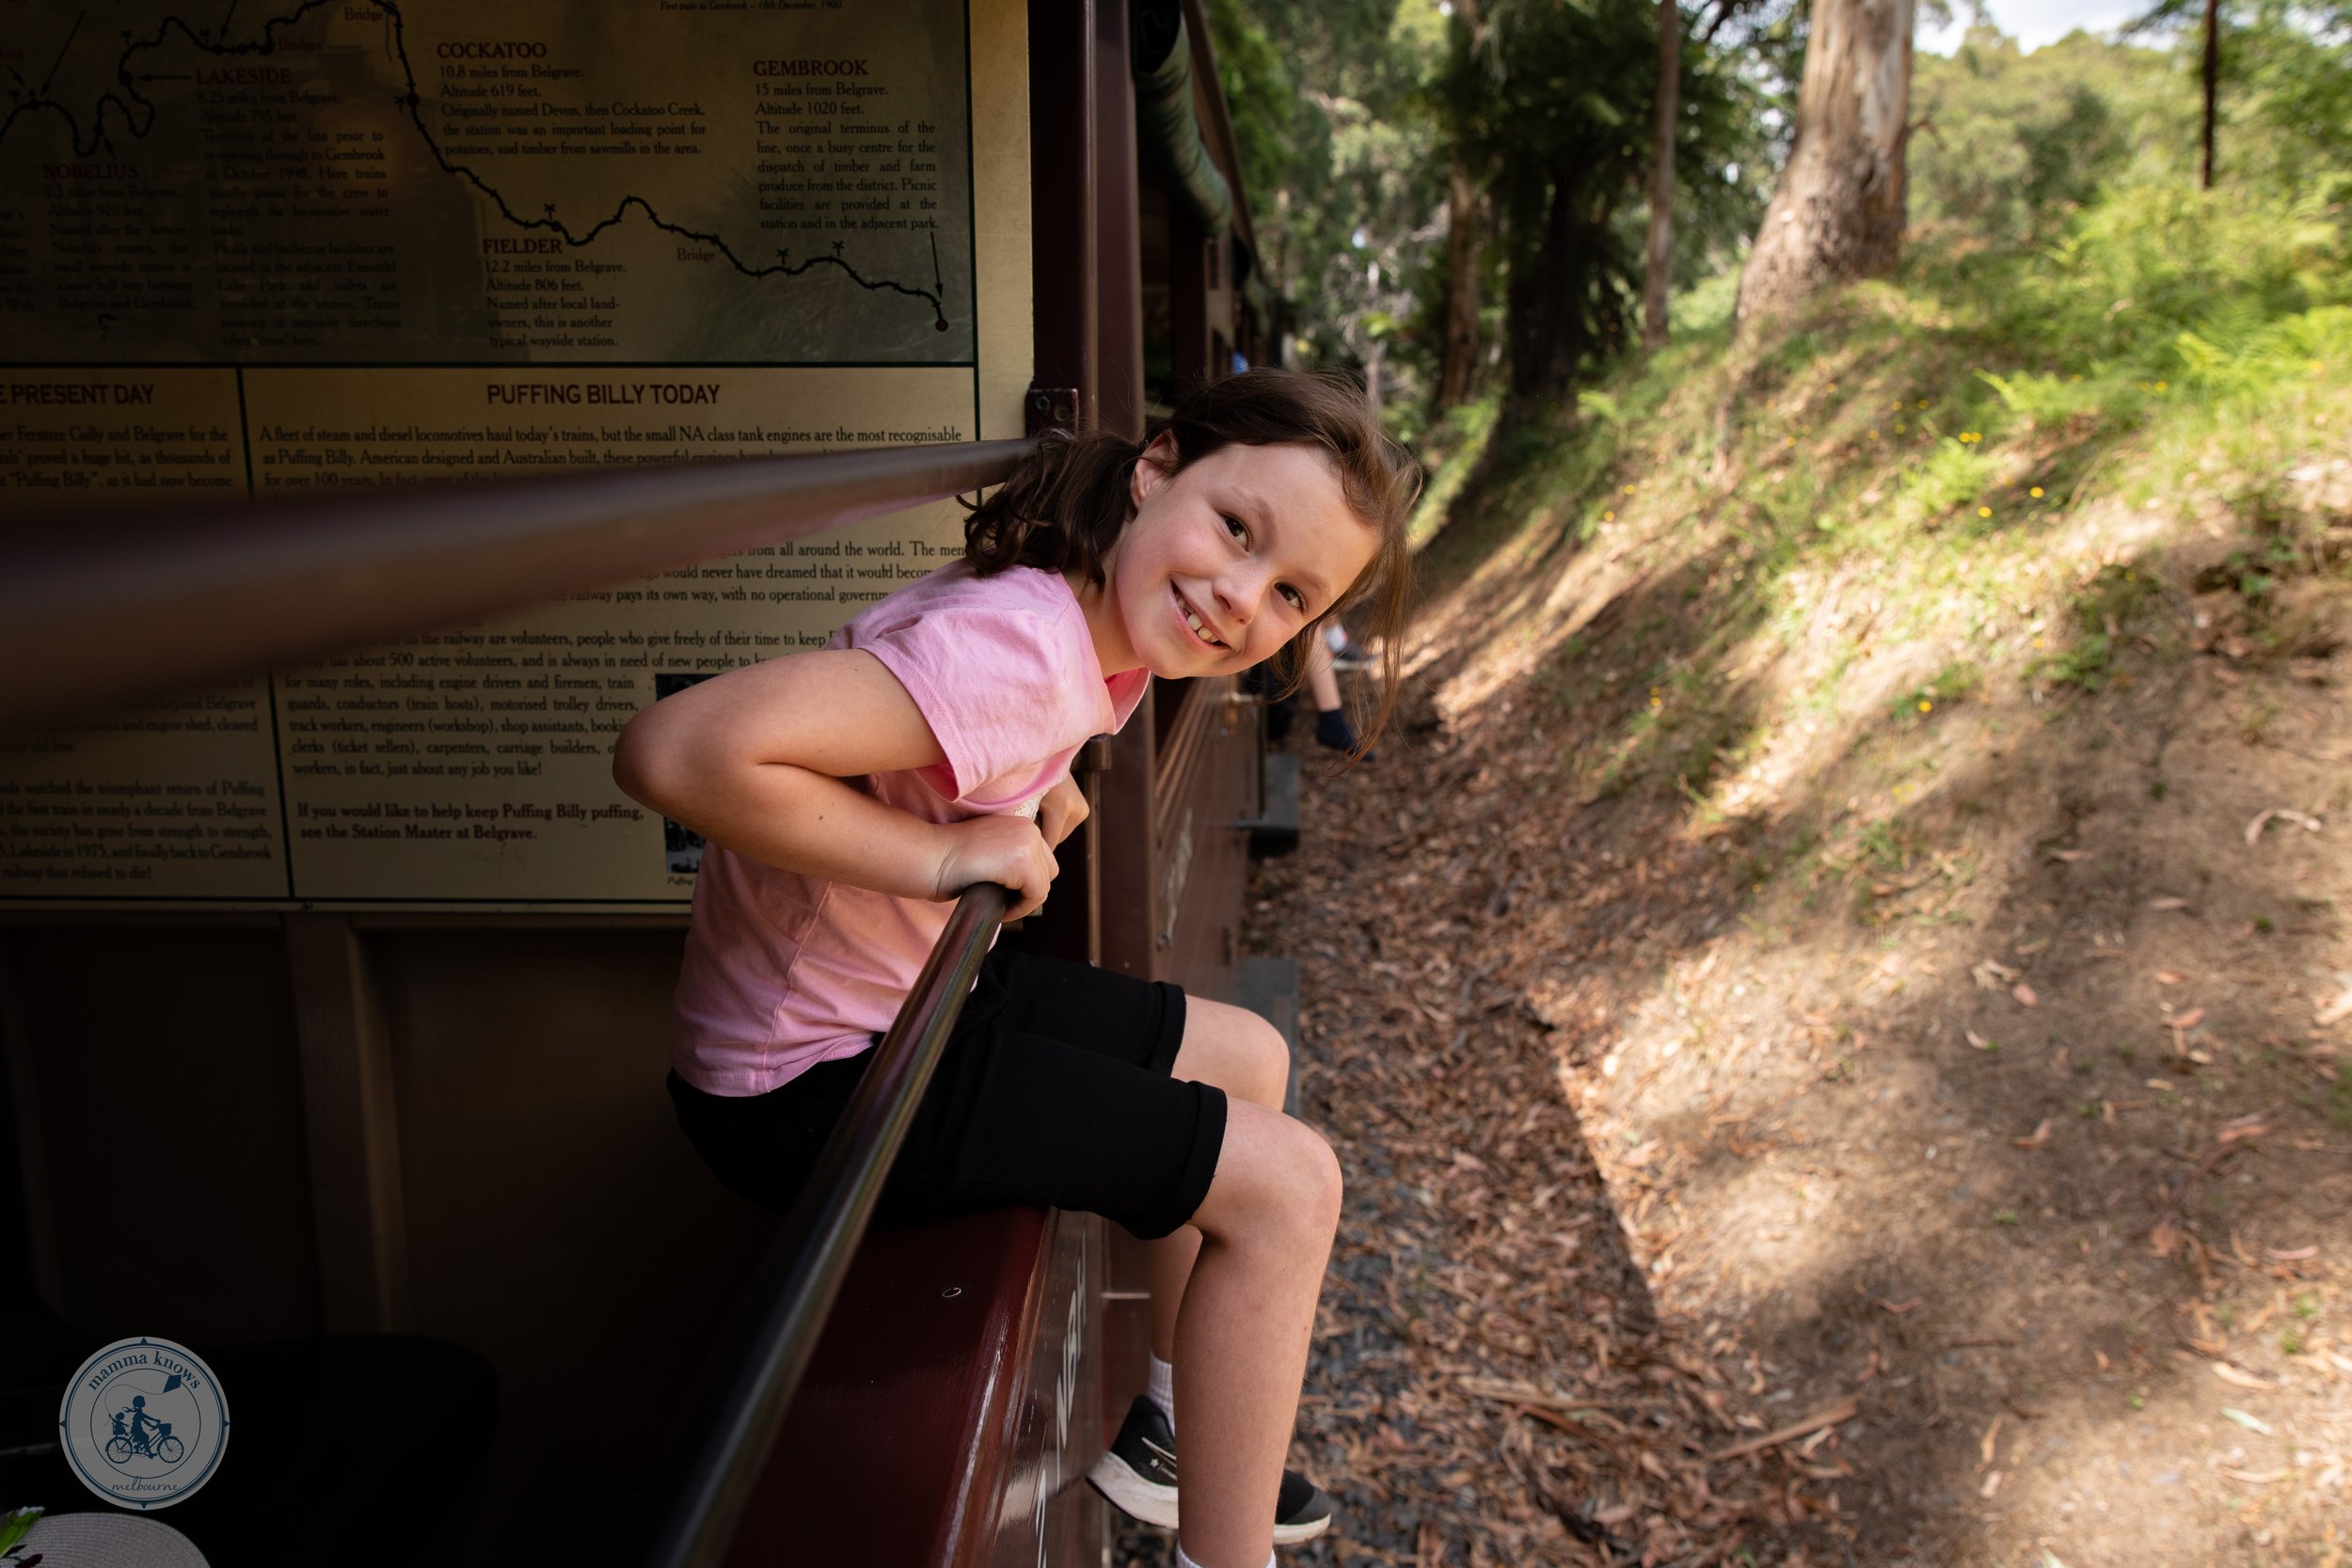 Puffing Billy, Dandenong Ranges